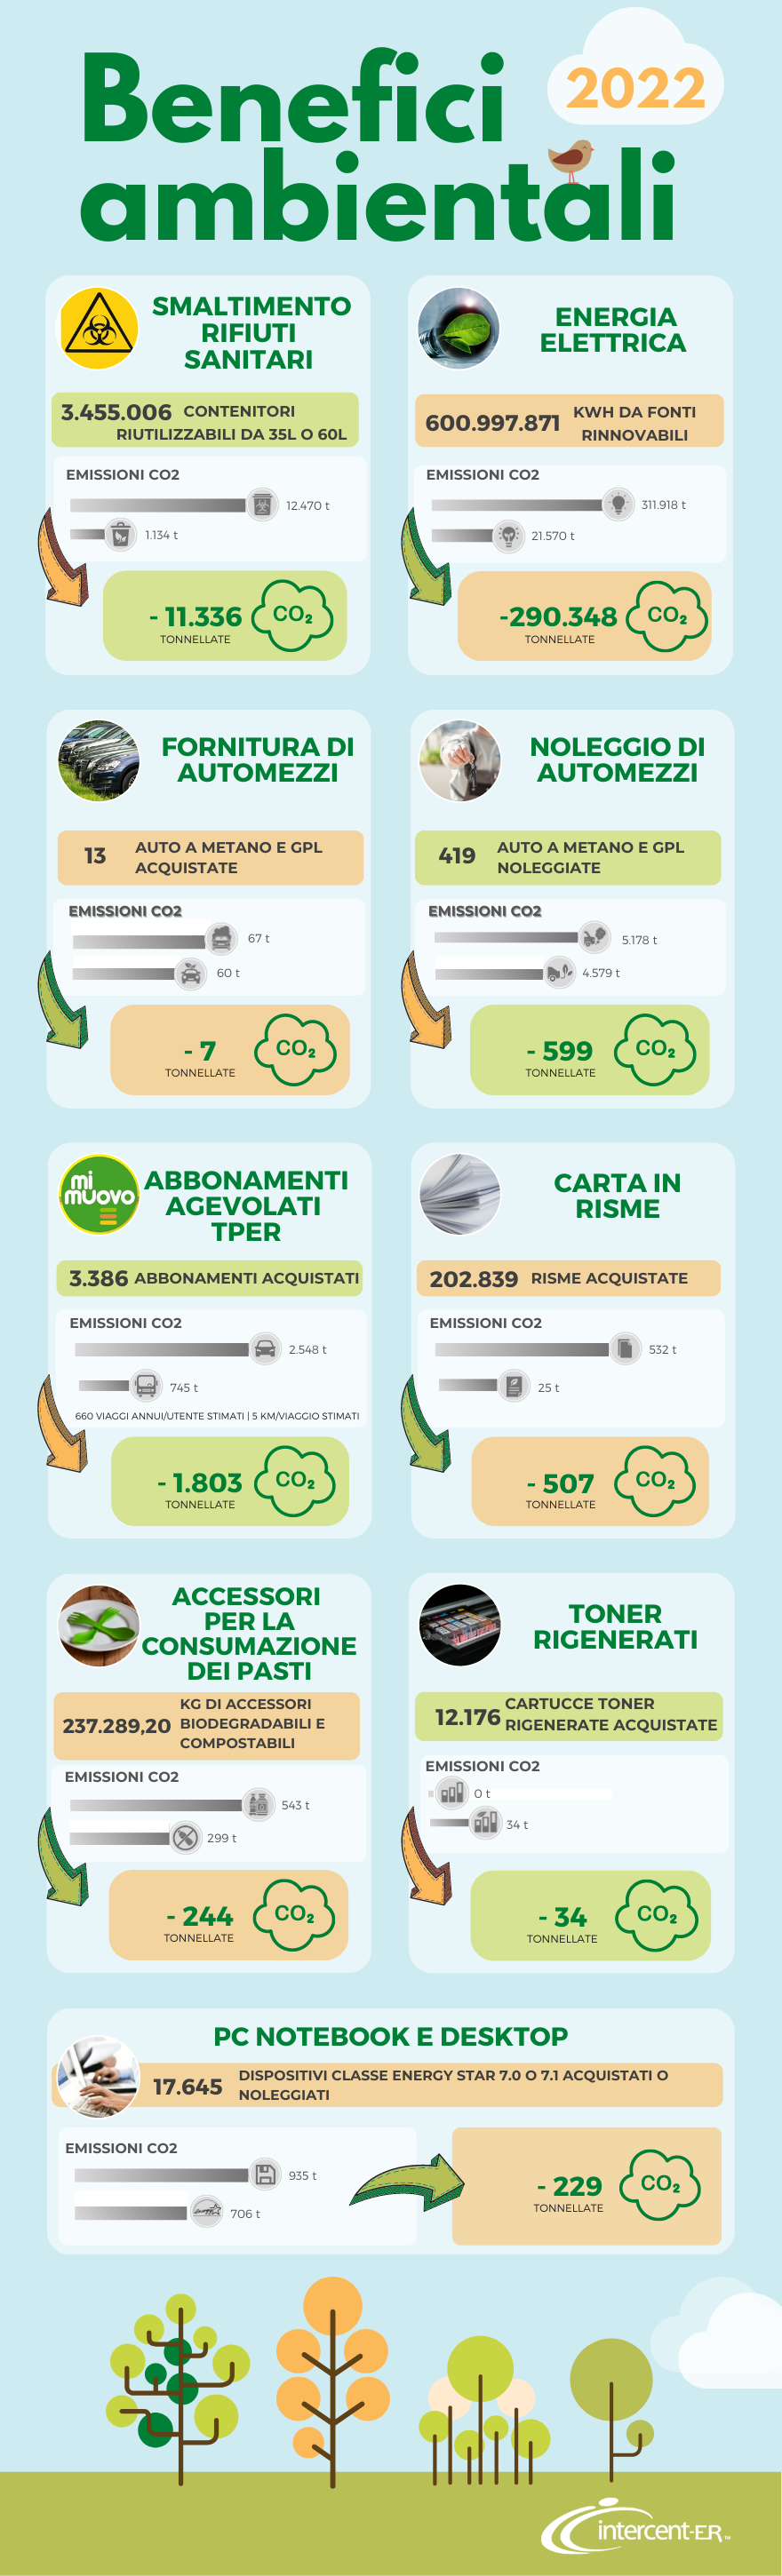 Infografica benefici Ambientali 2022.png